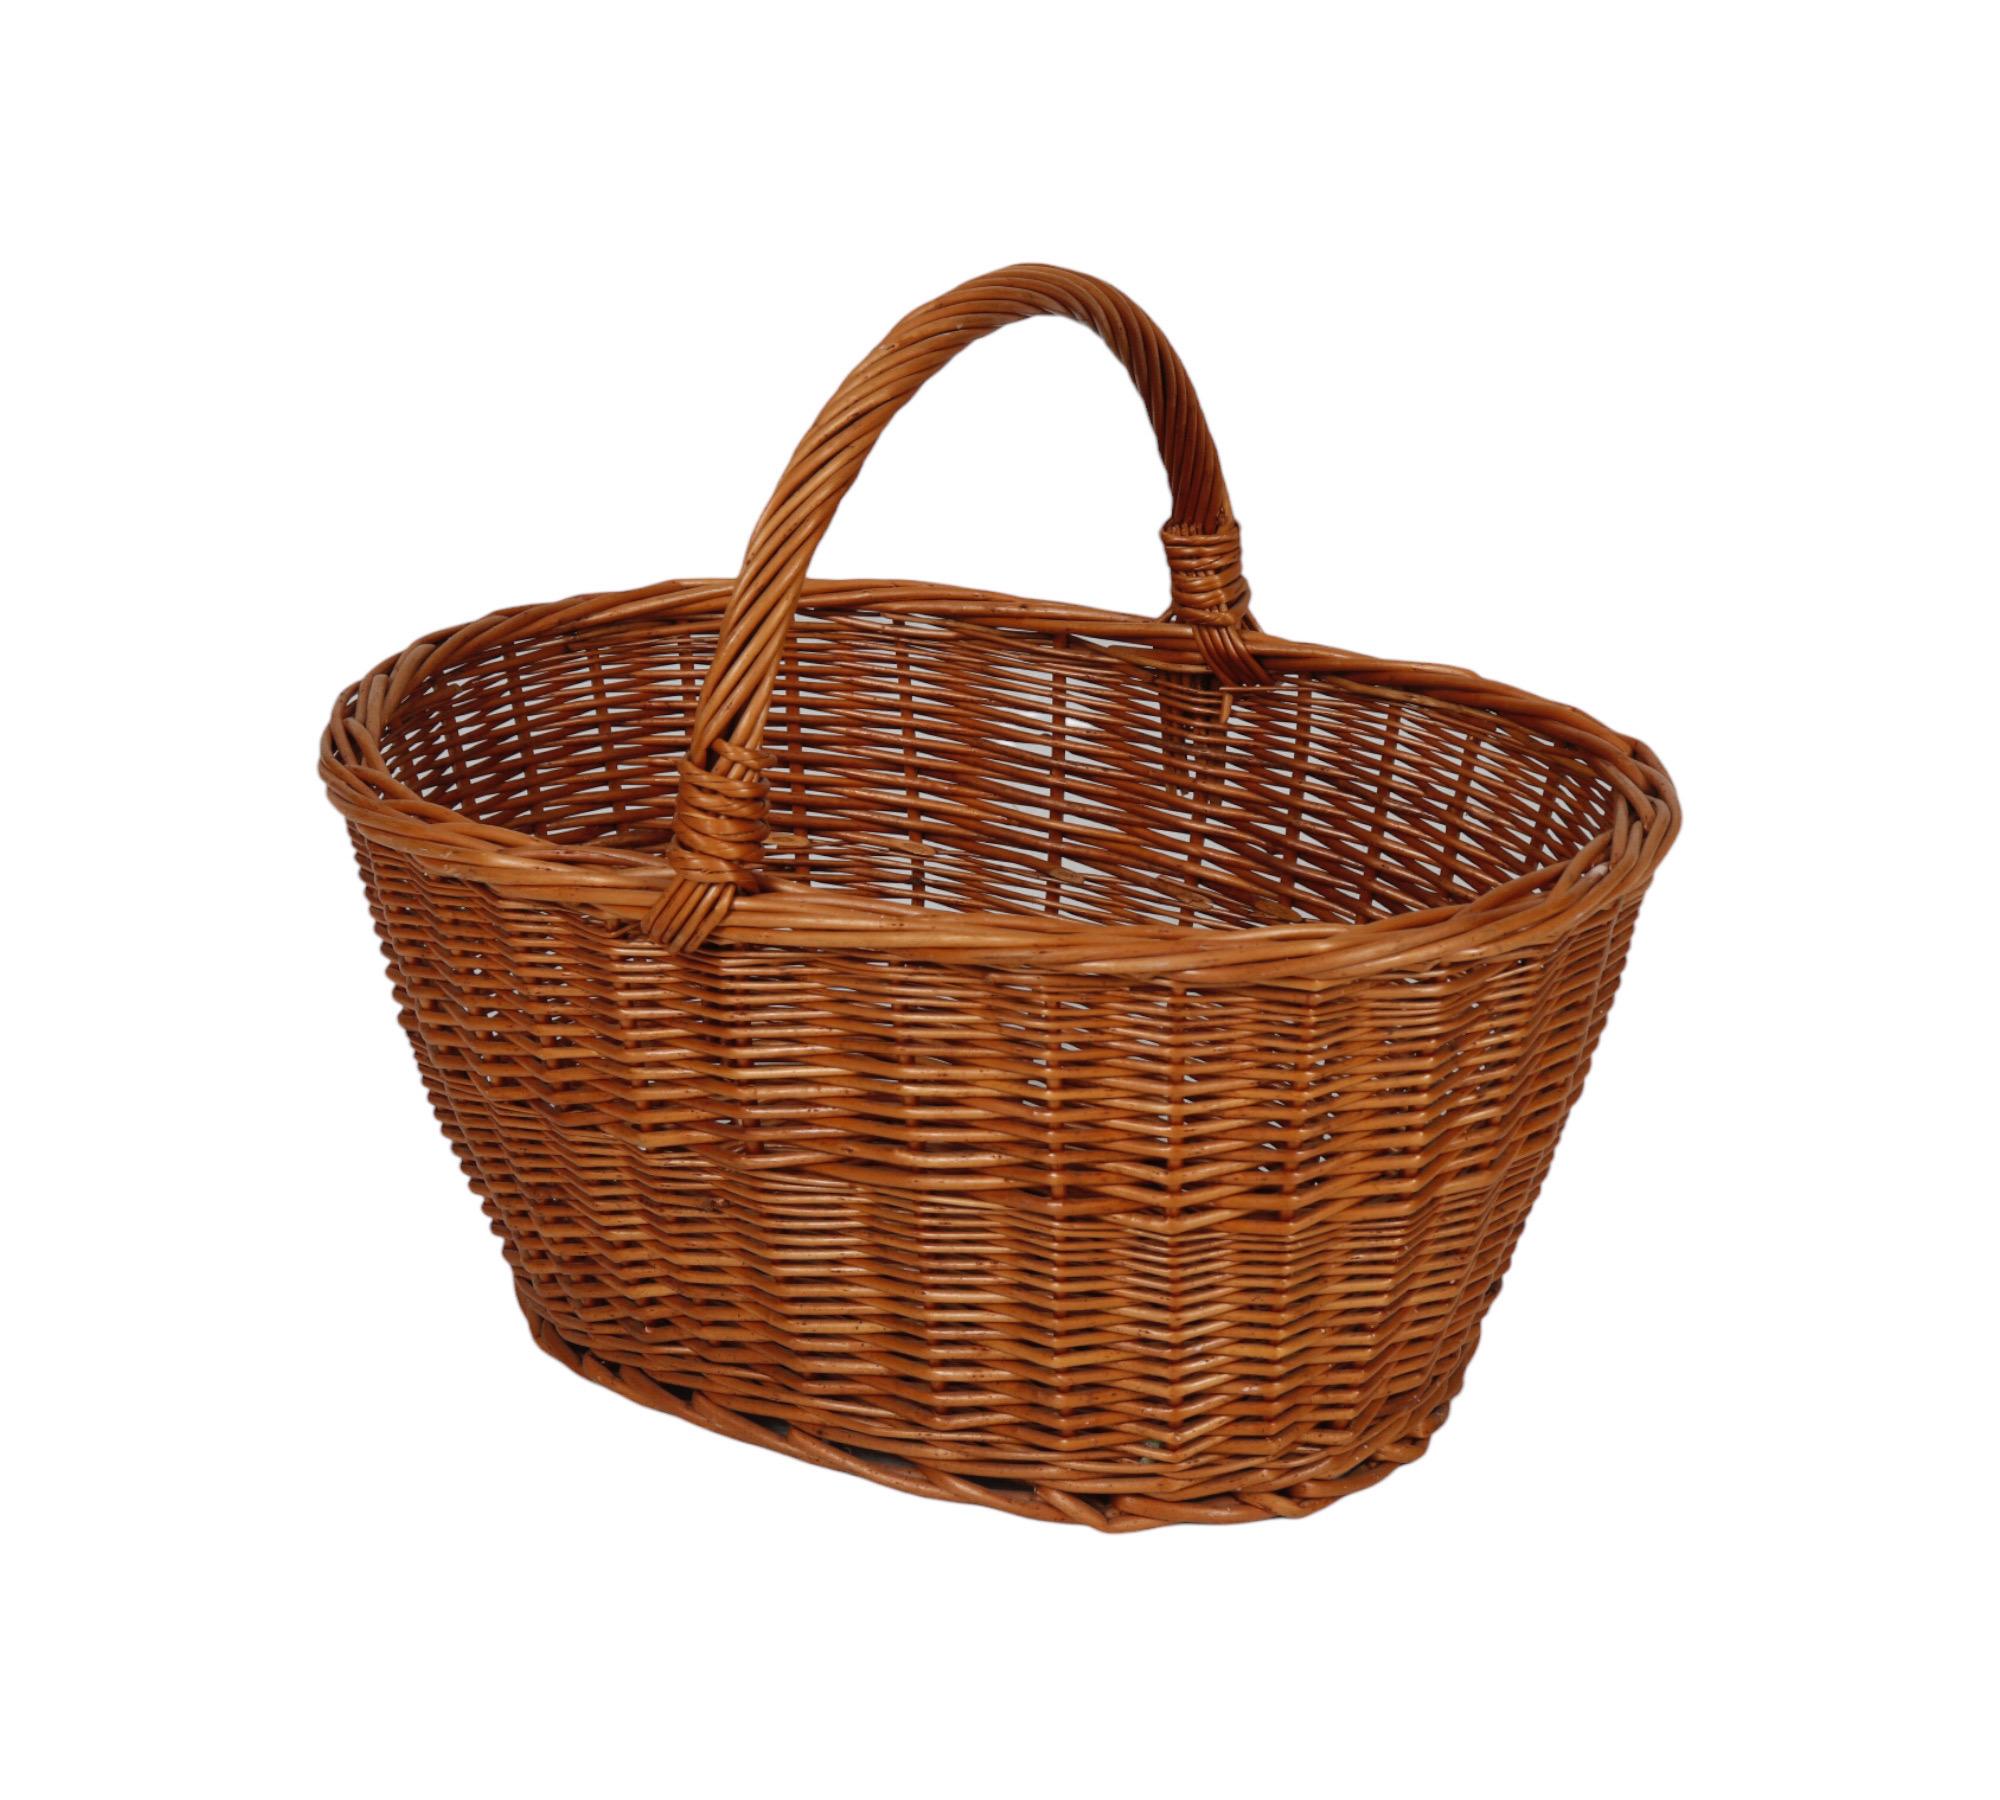 A classic French oval shaped wicker shopping basket. The twisted handle is secured to a twisted braided edge.
